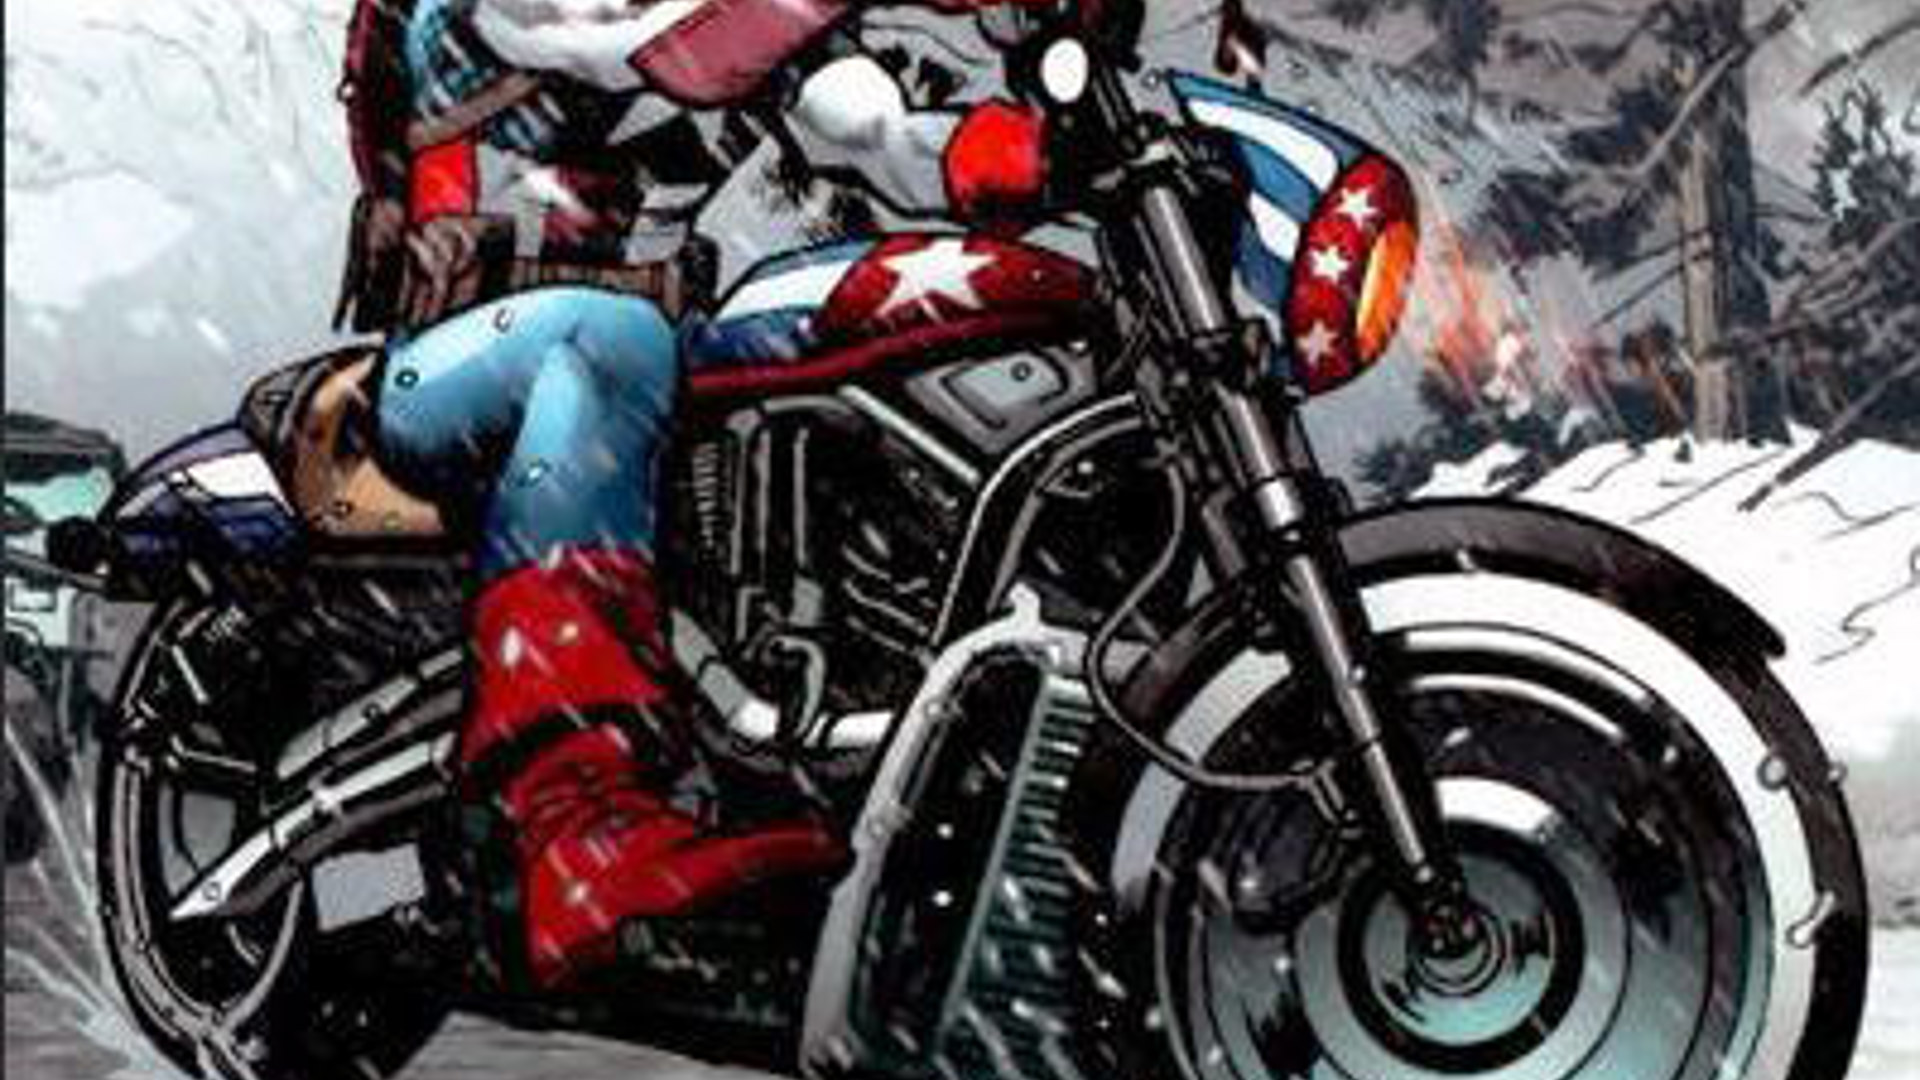 For almost all of his 70-year existence, Captain America has utilised this custom detailed vehicle, although the frequency of its usage ebbs and flows as the writers come and go. Usually, it's painted in garish red, white and blue scheme, matching Cap's own colour scheme. Of course, it's a Harley and what else would it be? In the case of a guy called Captain America, you can forgive a little patriotism.